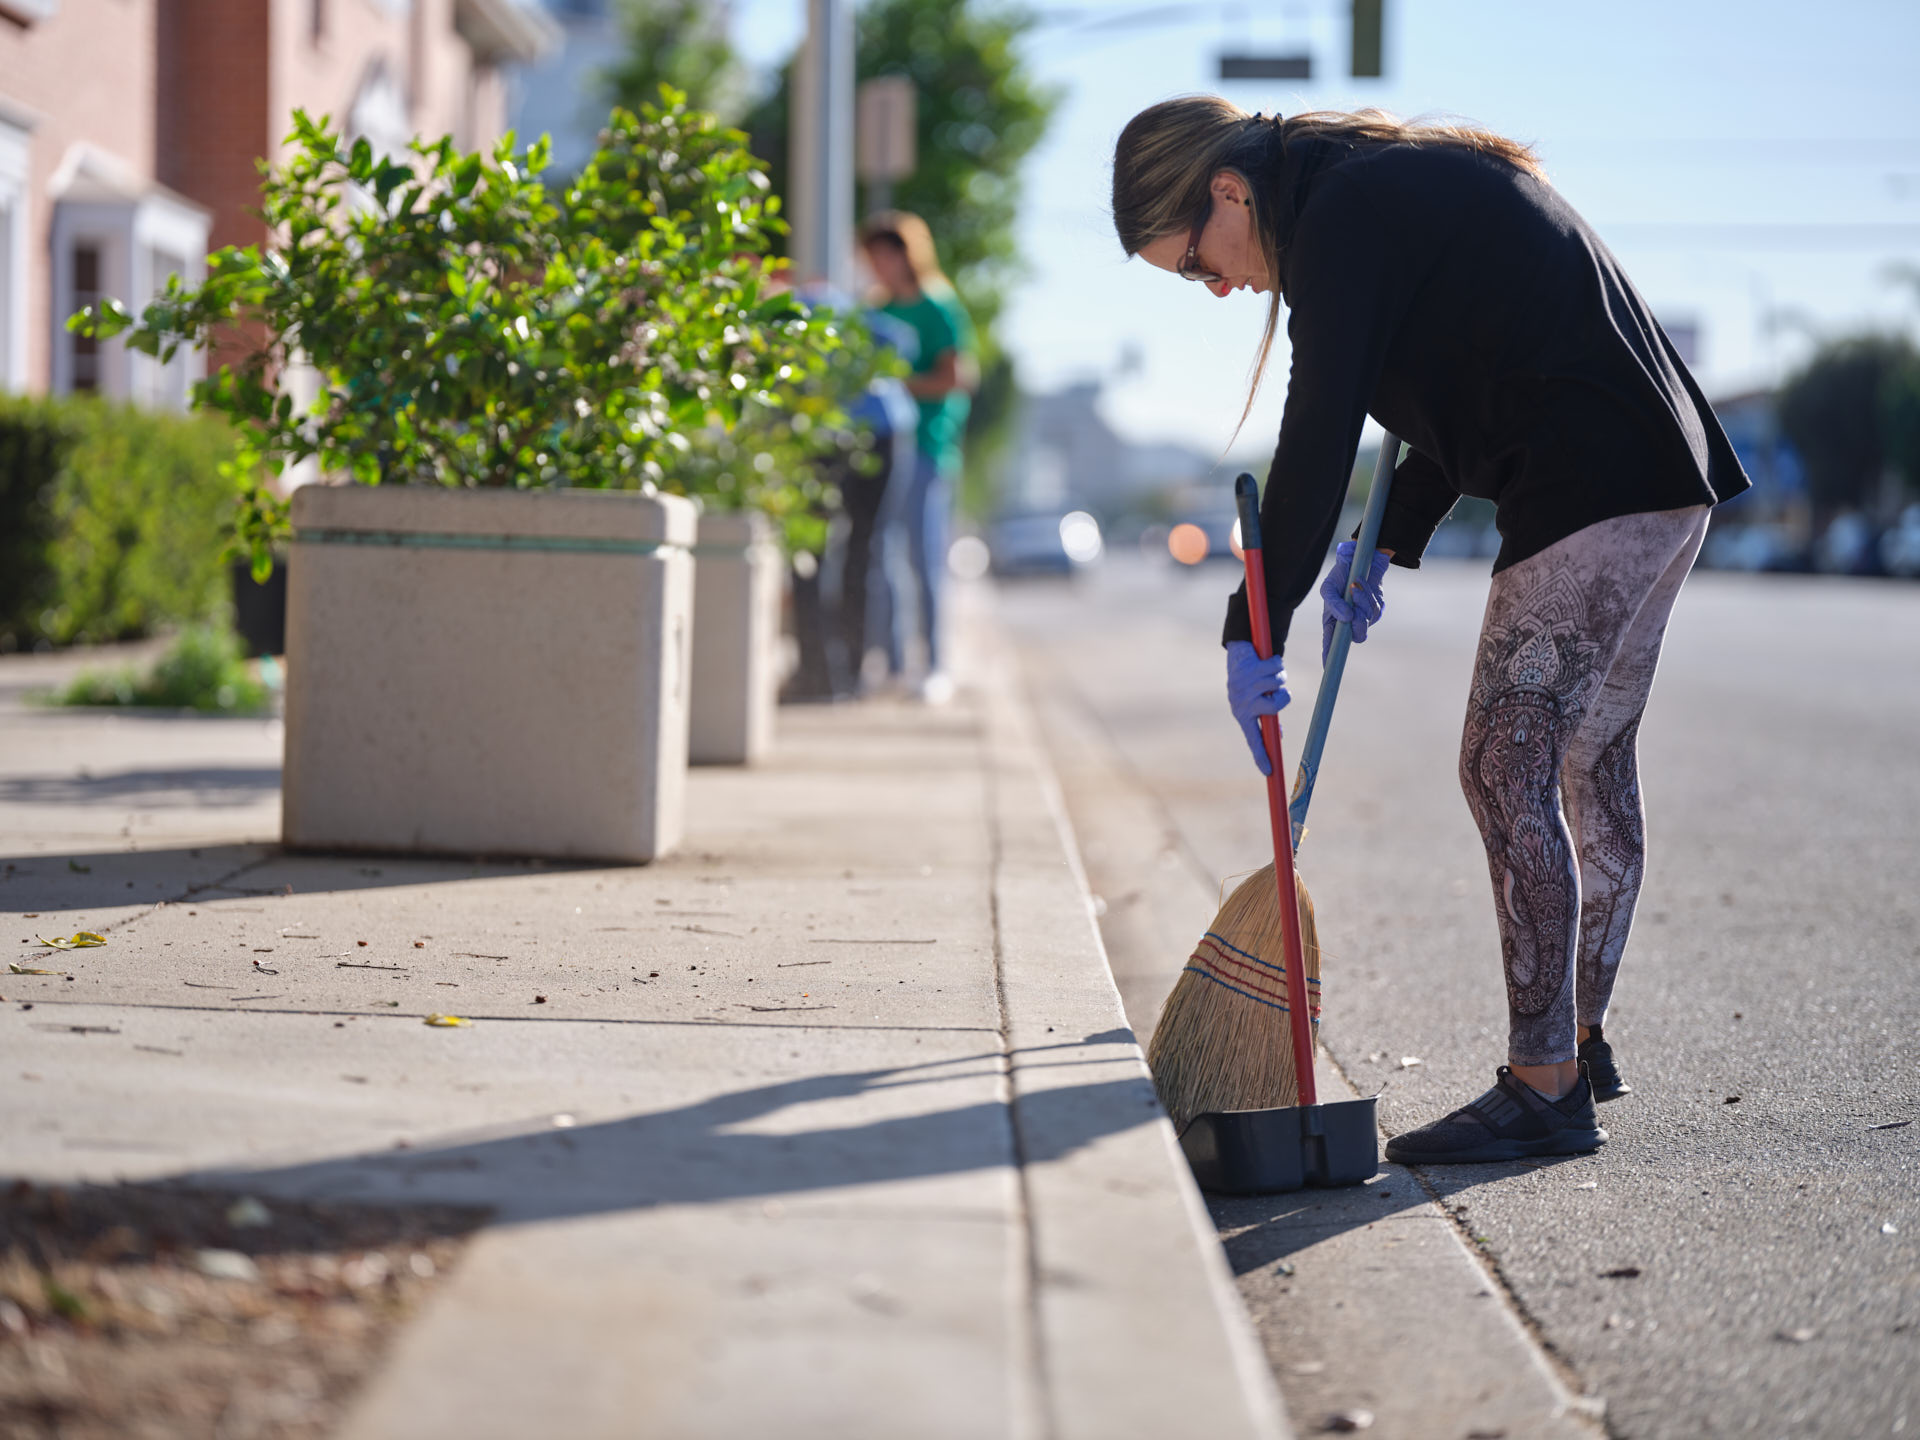 cleanup-keeps-our-city-beautiful-18